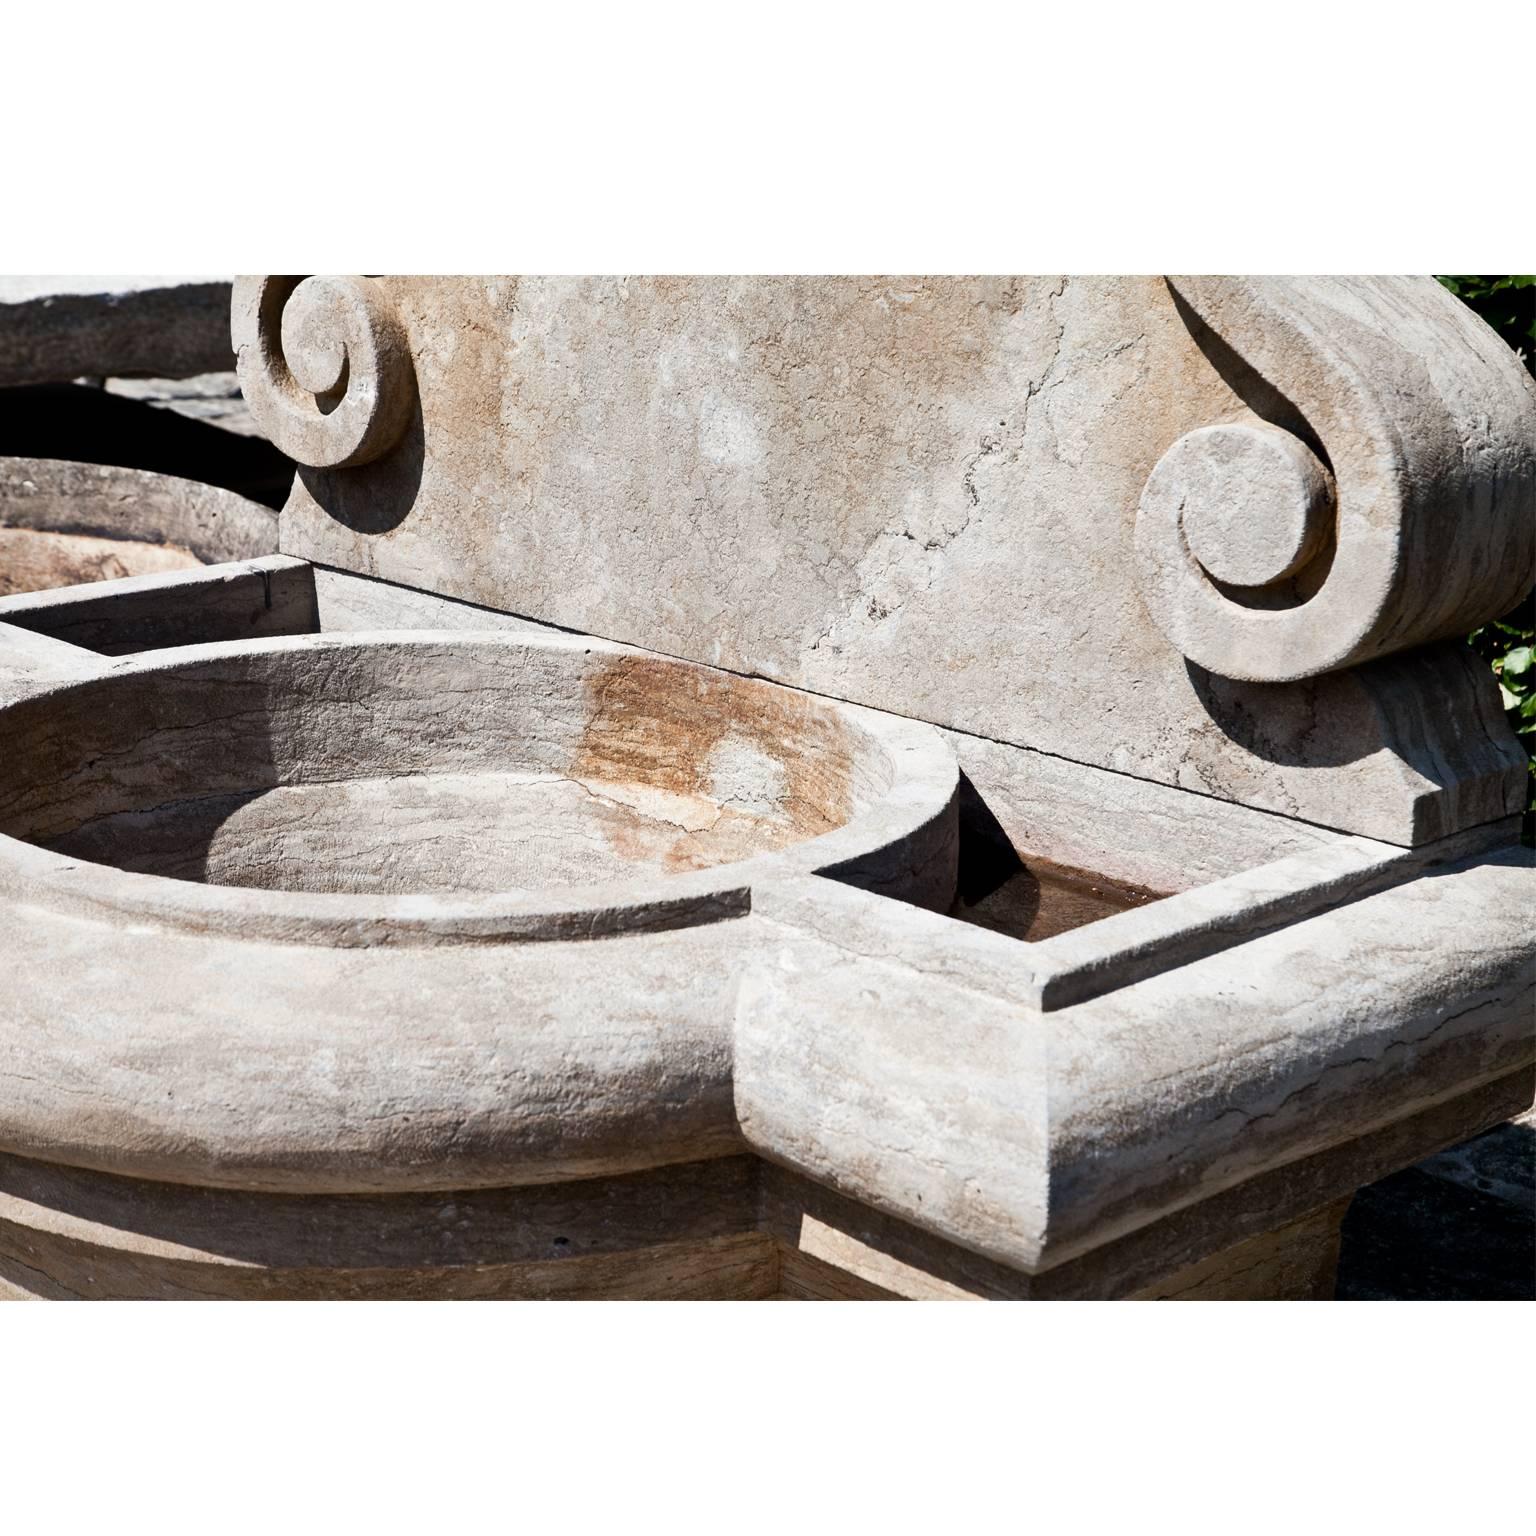 Ochre colored wall fountain out of hand-cut bluestone with a round basin and a flower ornament around the spout.
Height of the basin: 75 cm.